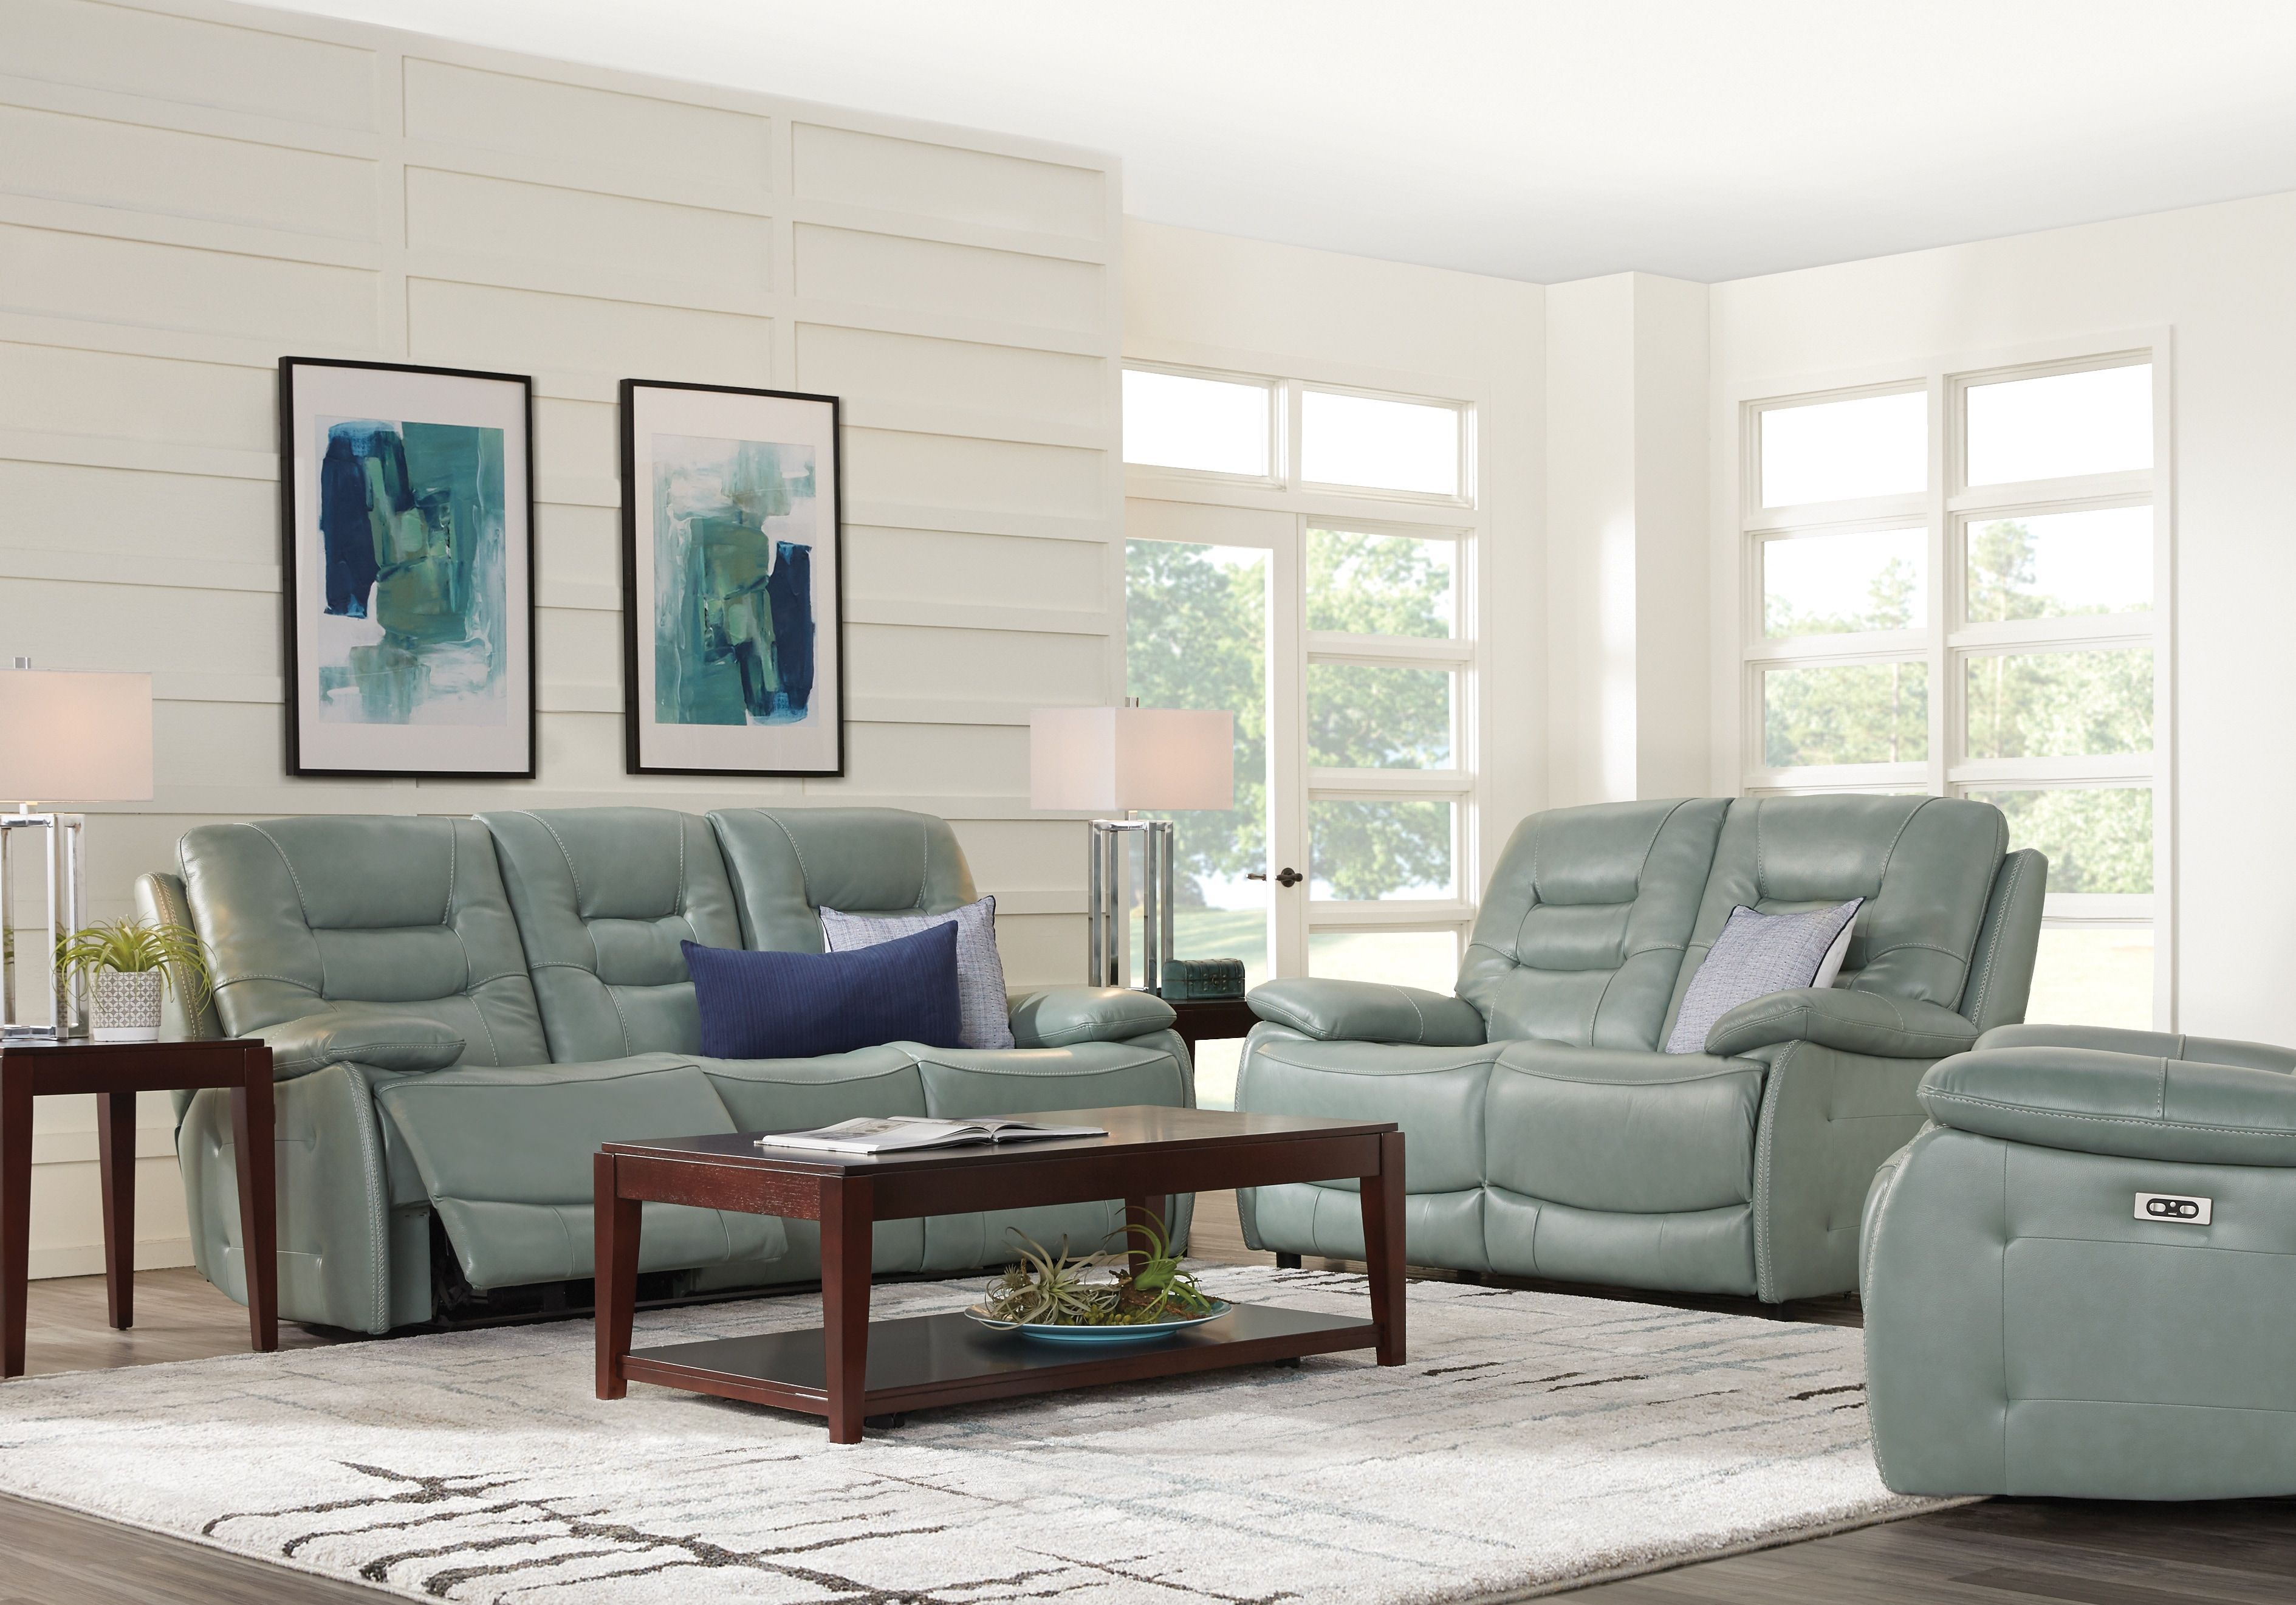 Bobs Fireplace New Carini Seafoam Leather 3 Pc Living Room with Reclining sofa